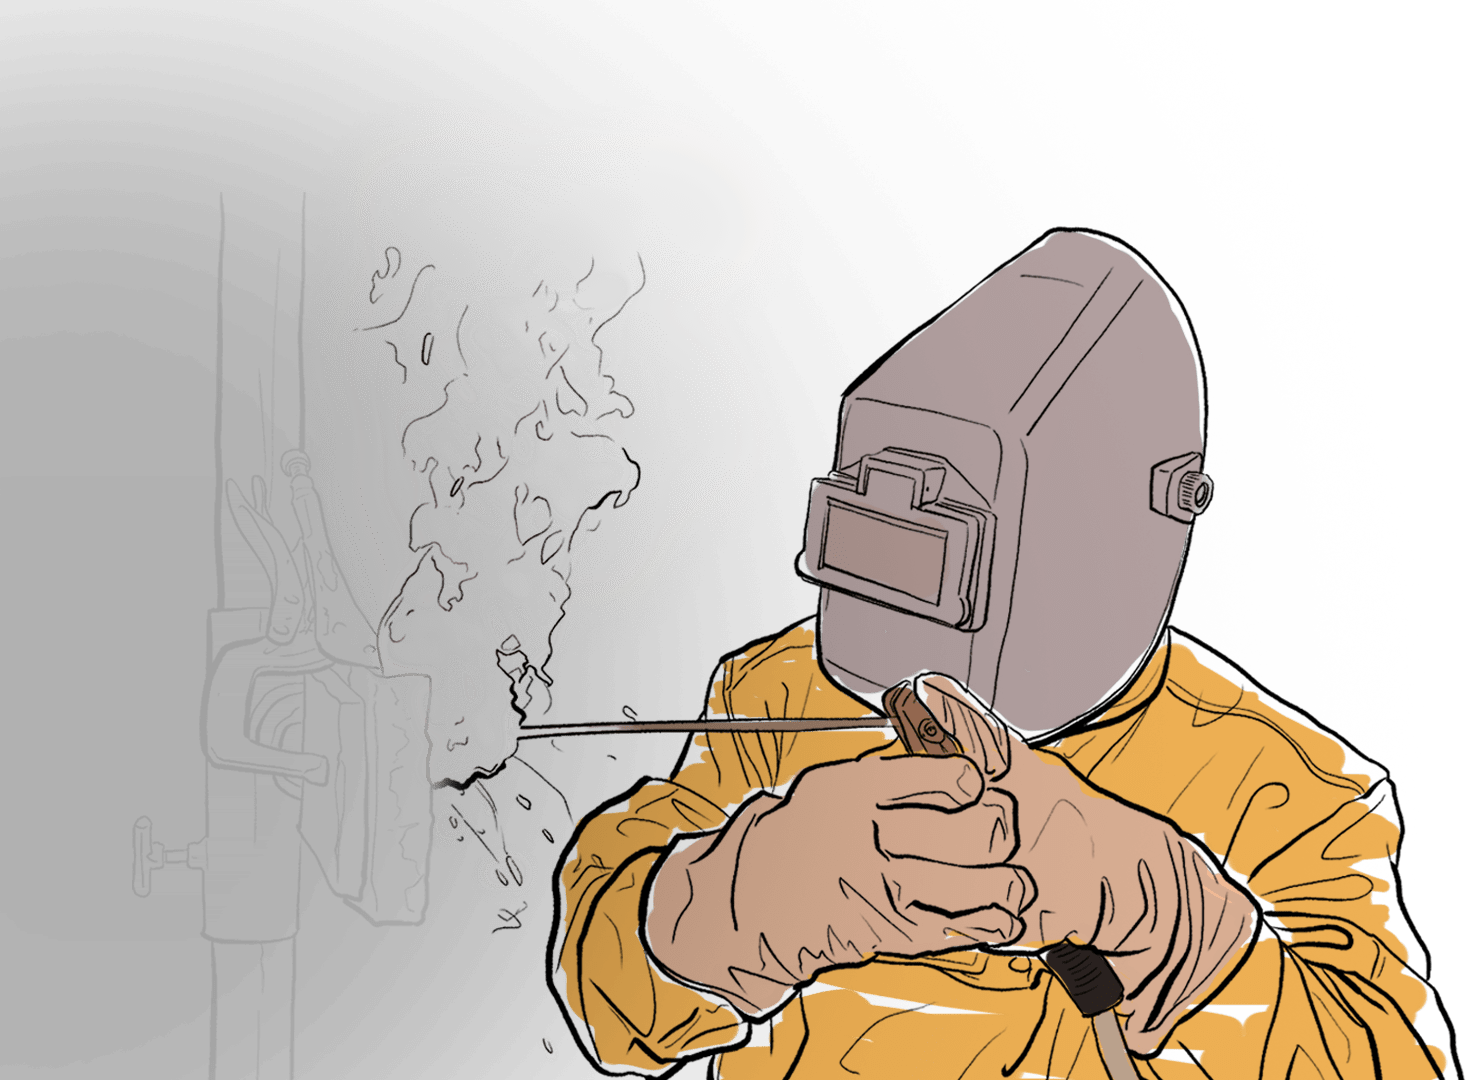 Colored sketch of a Summit College welding student learning hands-on.